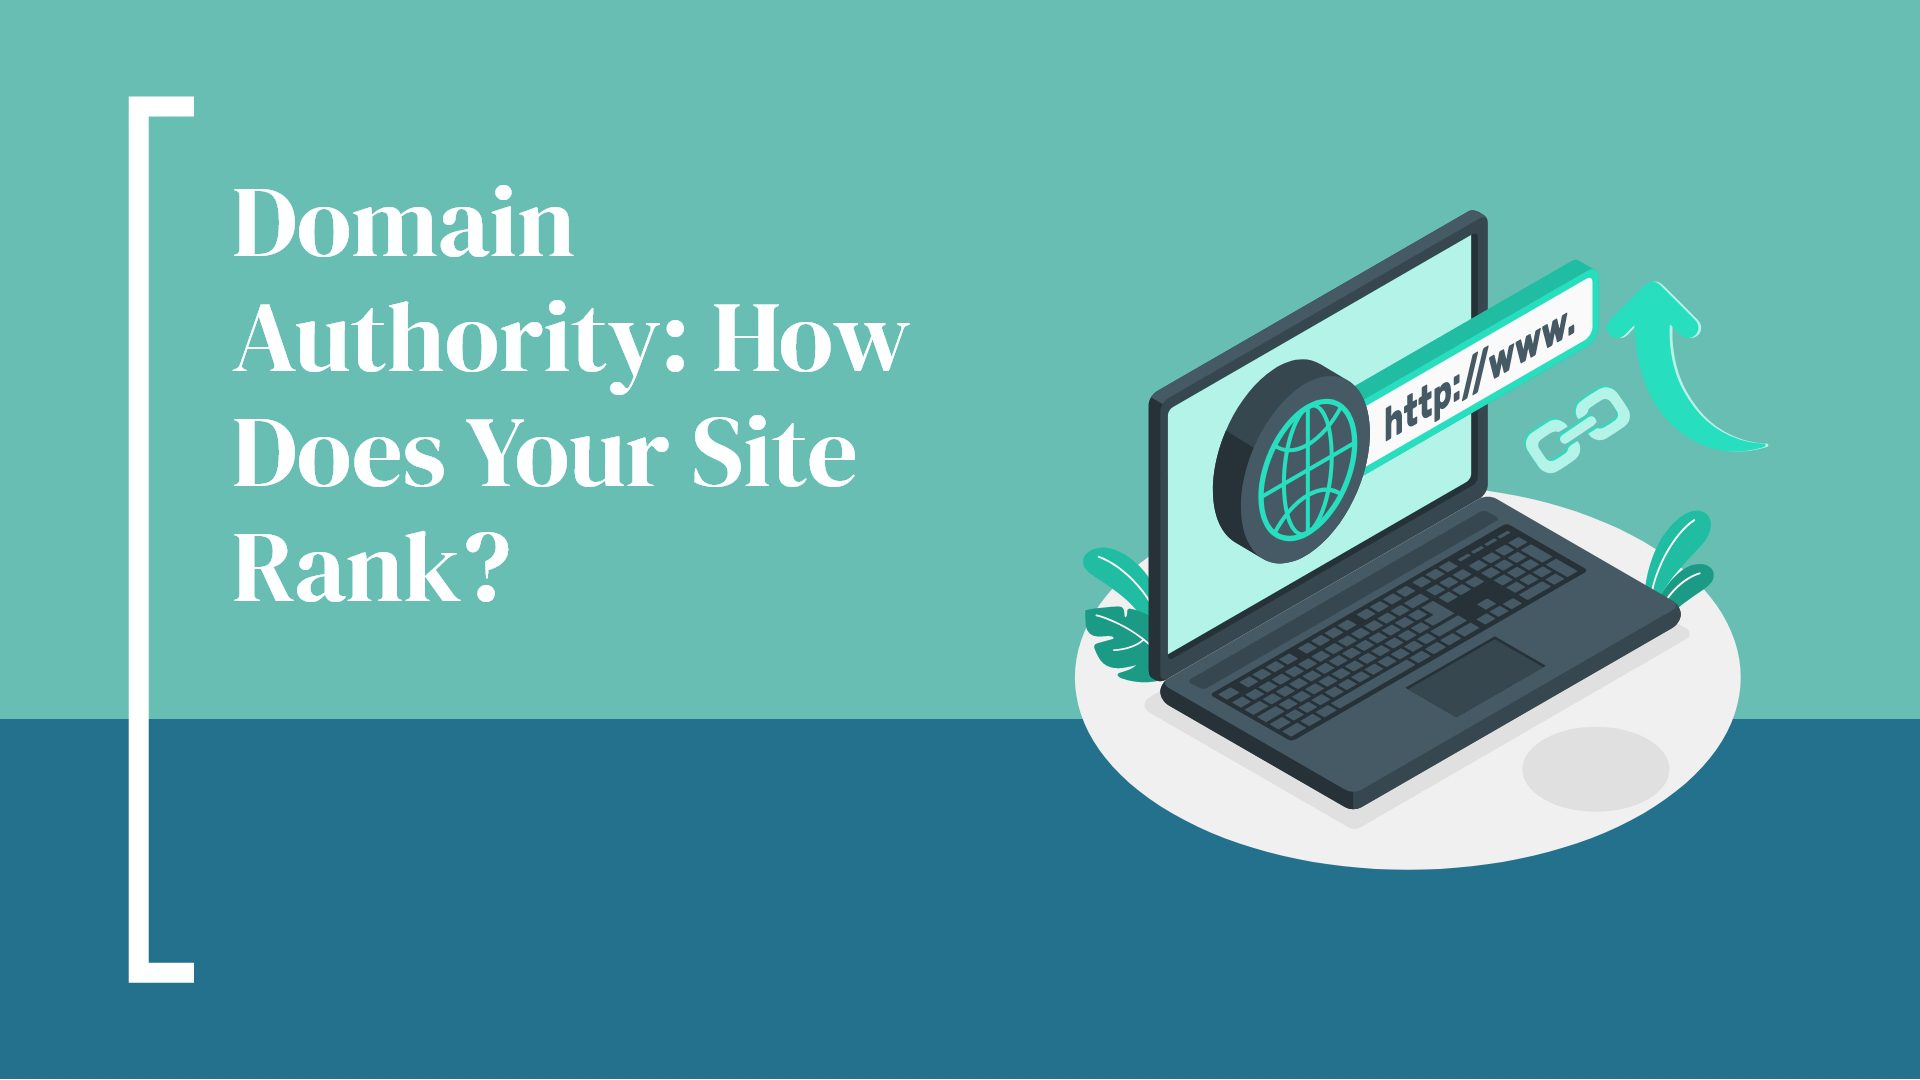 Domain Authority: How Does Your Site Rank?